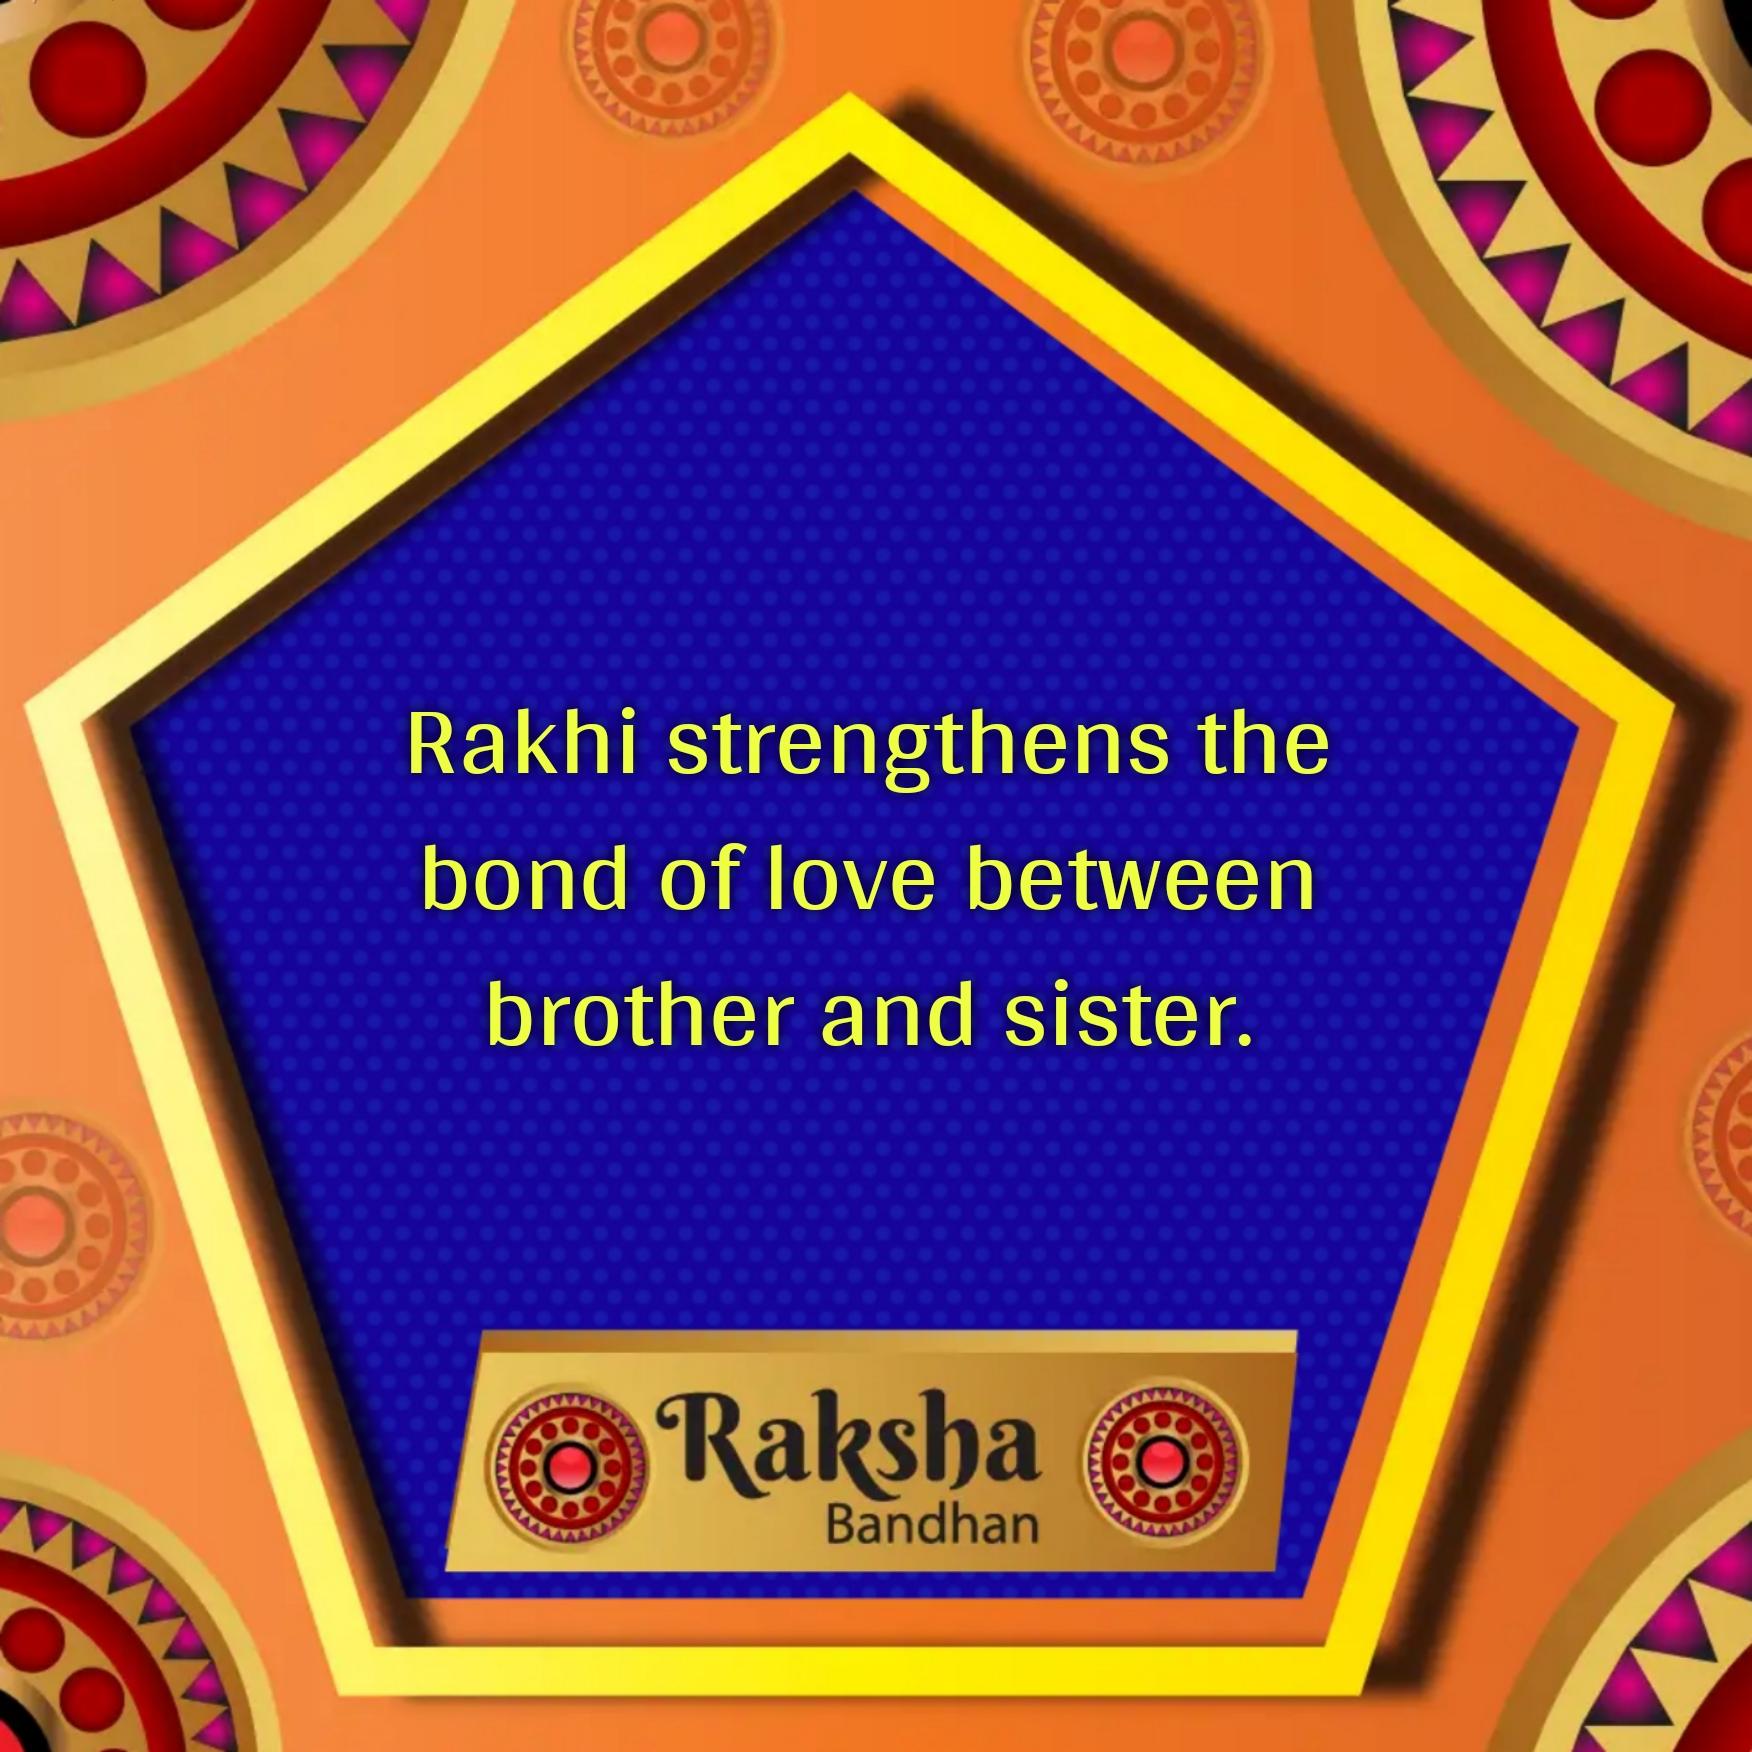 Rakhi strengthens the bond of love between brother and sister